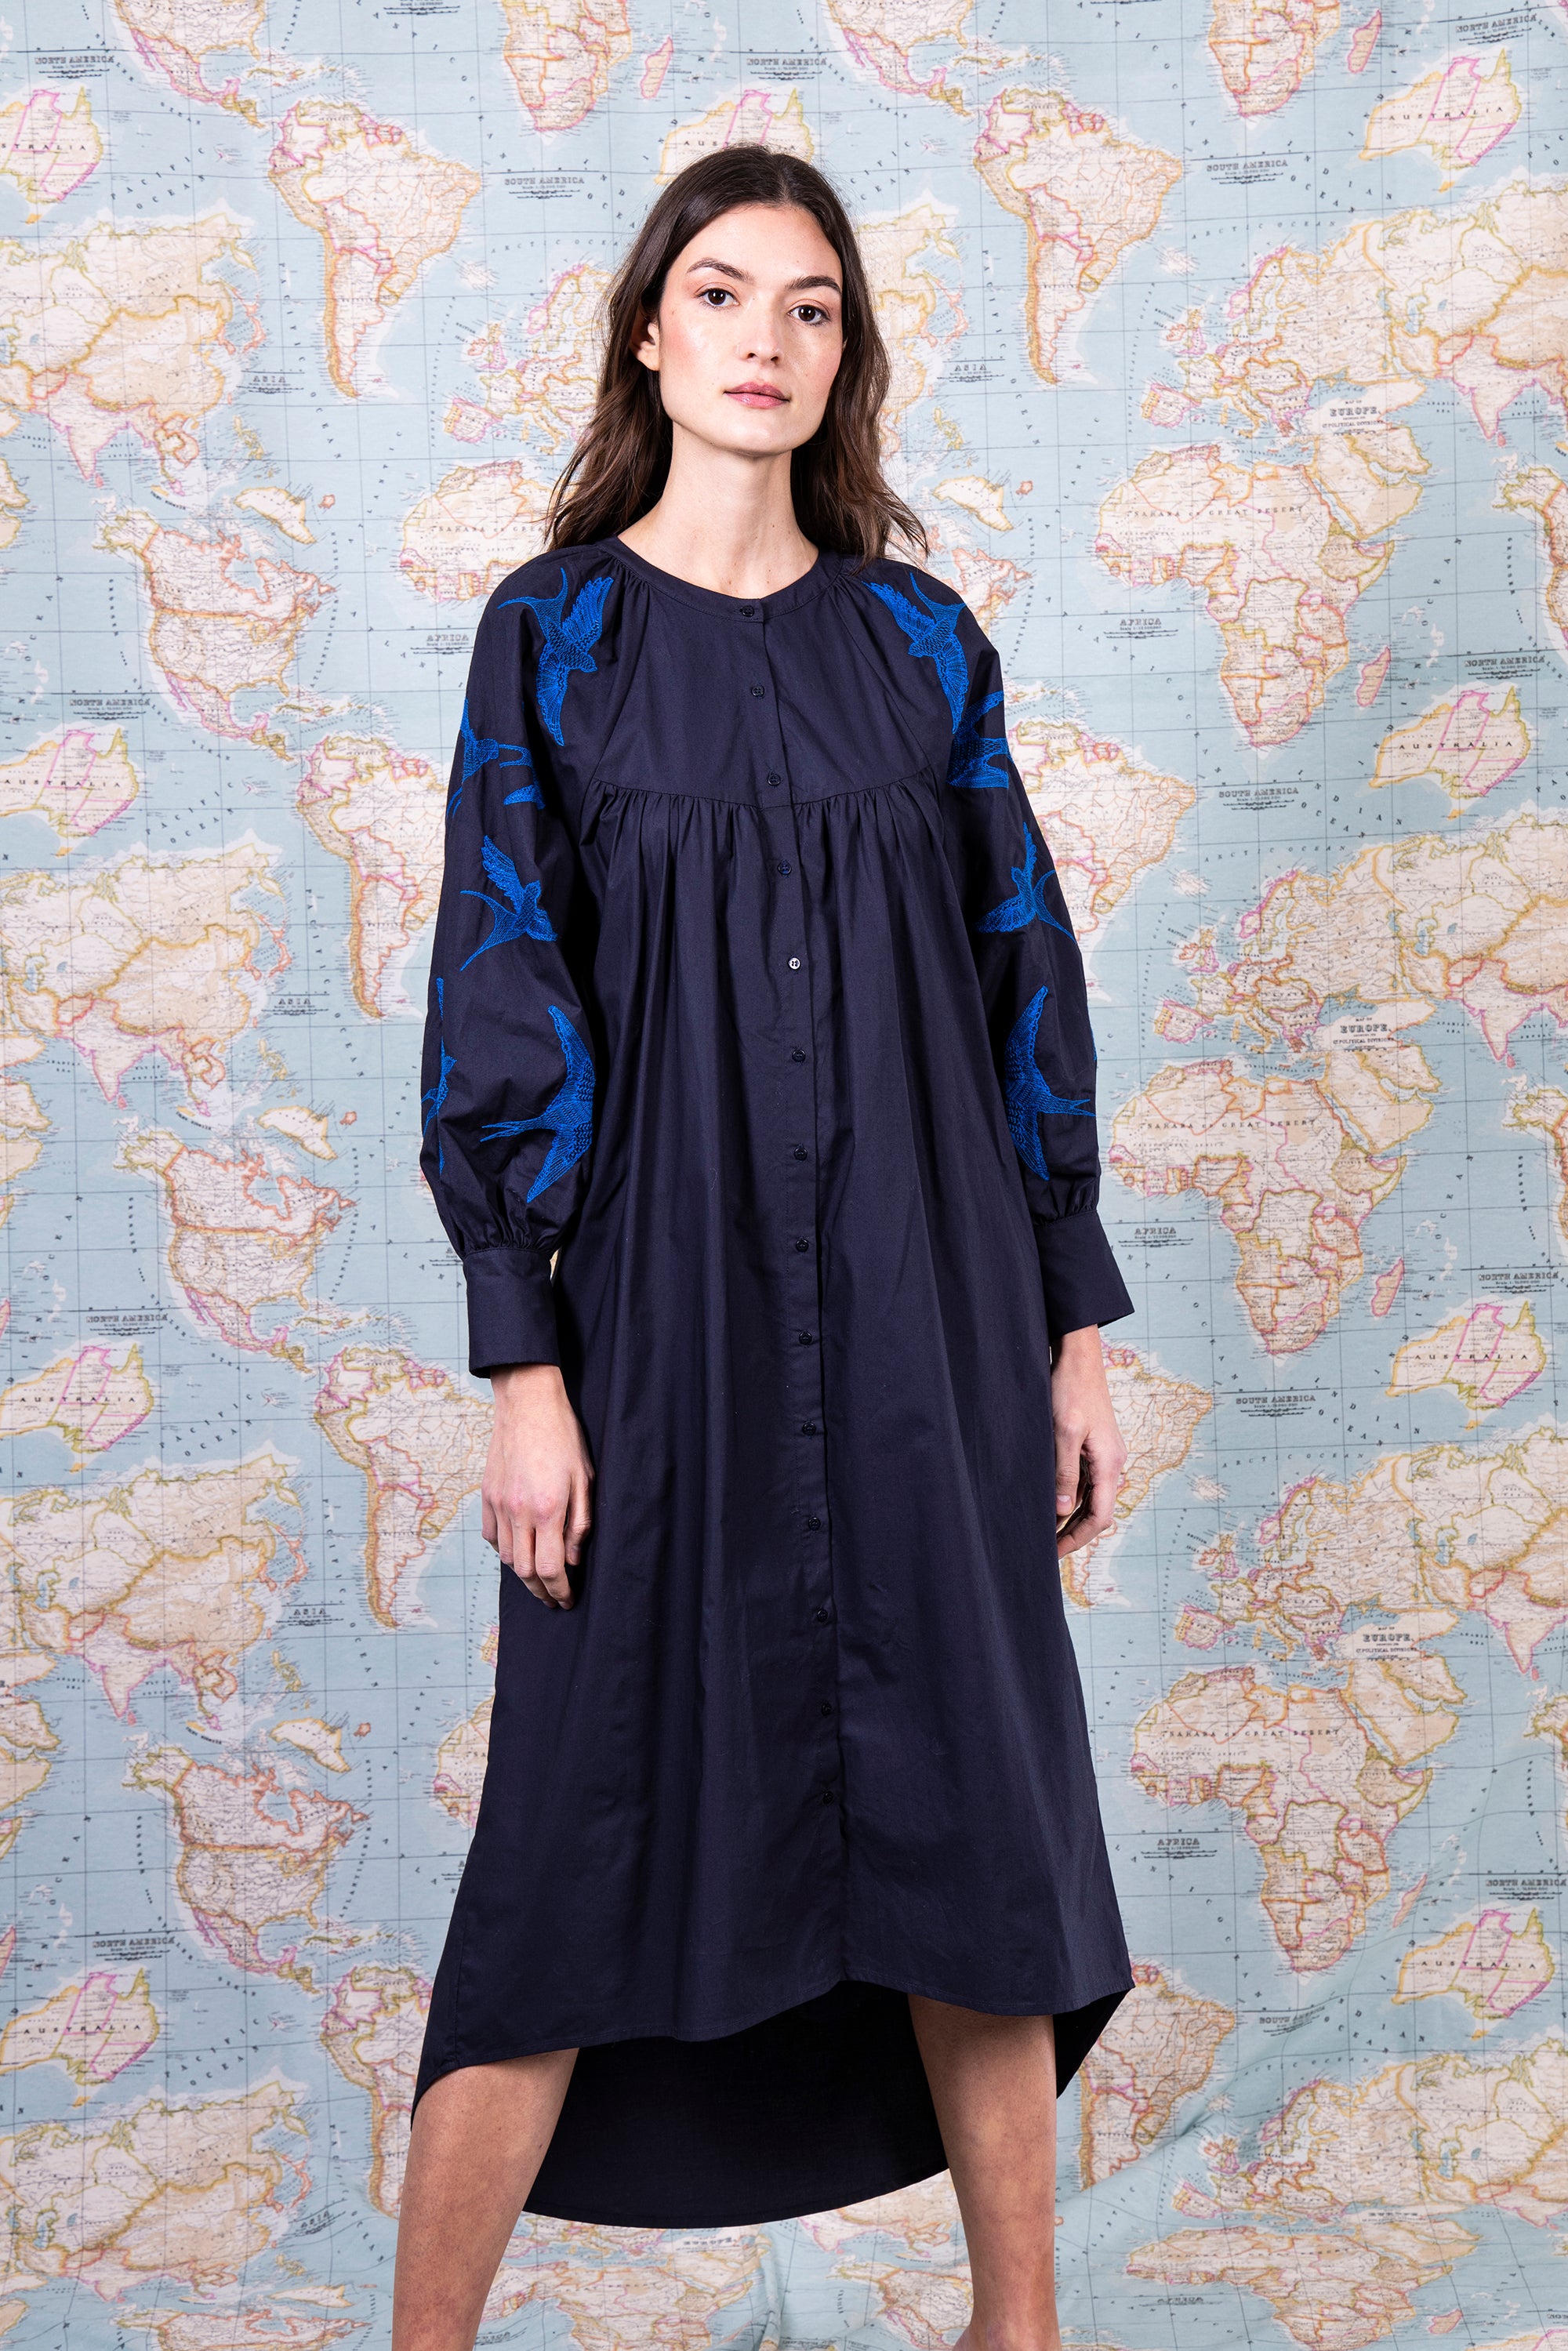 fluid and light mid-length dress Peruvian cotton woman artisanal embroidery navy blue and sapphire blue birds voluminous sleeves wide and flared cut